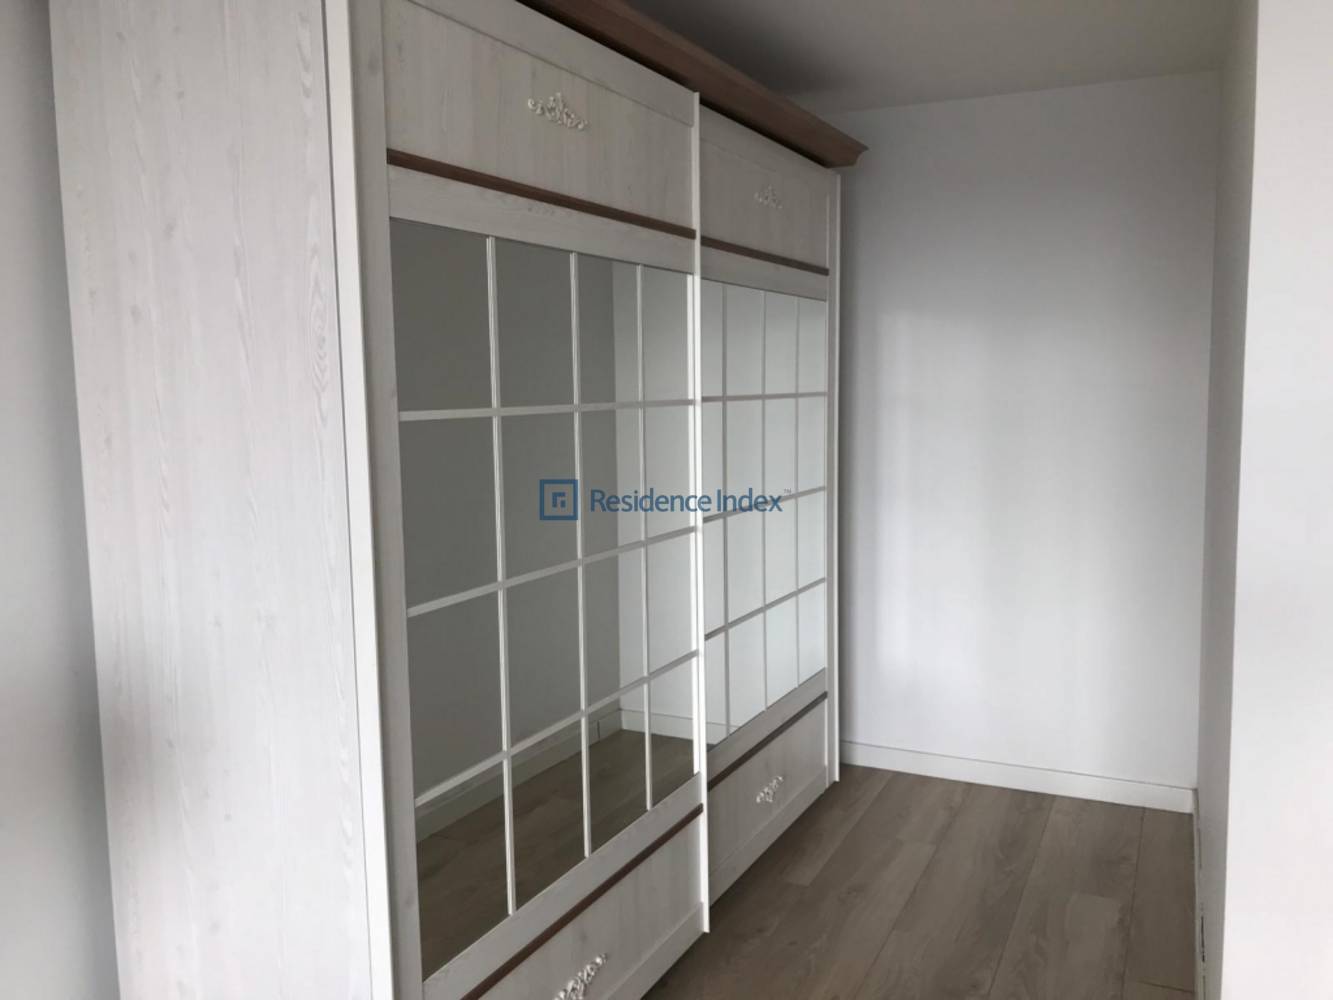 Flat For Sale in İstwest Project